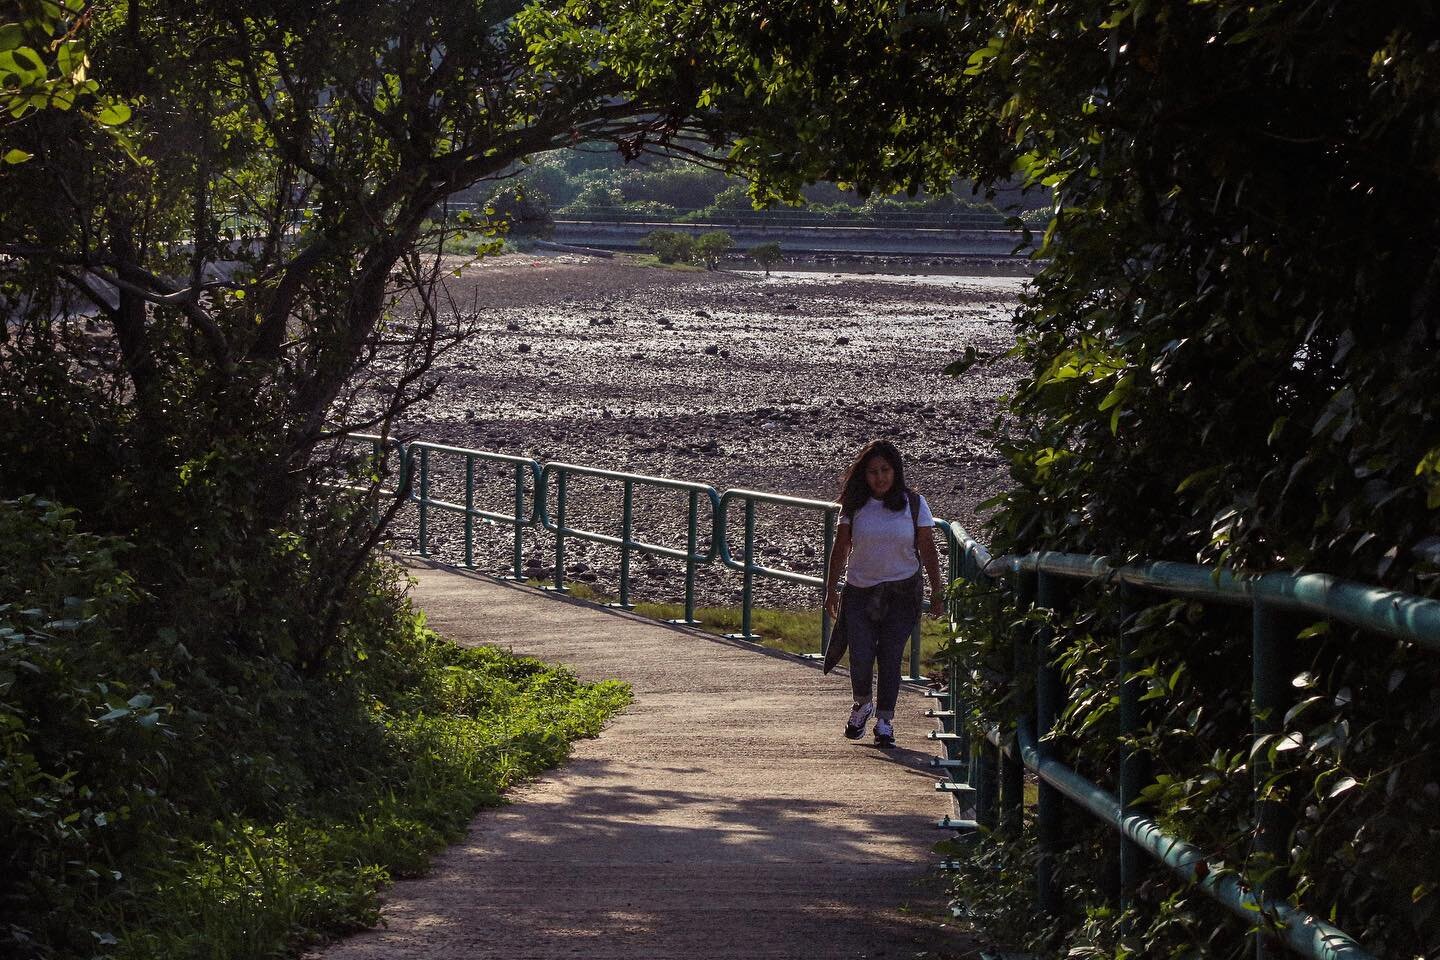 People and Places 🌏 : Yolanda, Tai O

&ldquo;I was introduced to Tai O in 2018 when I came for an outreach. I feel relaxed, at peace, and refreshed when I'm surrounded by nature. Here is also where I&rsquo;ve gained clarity in my personal vision and